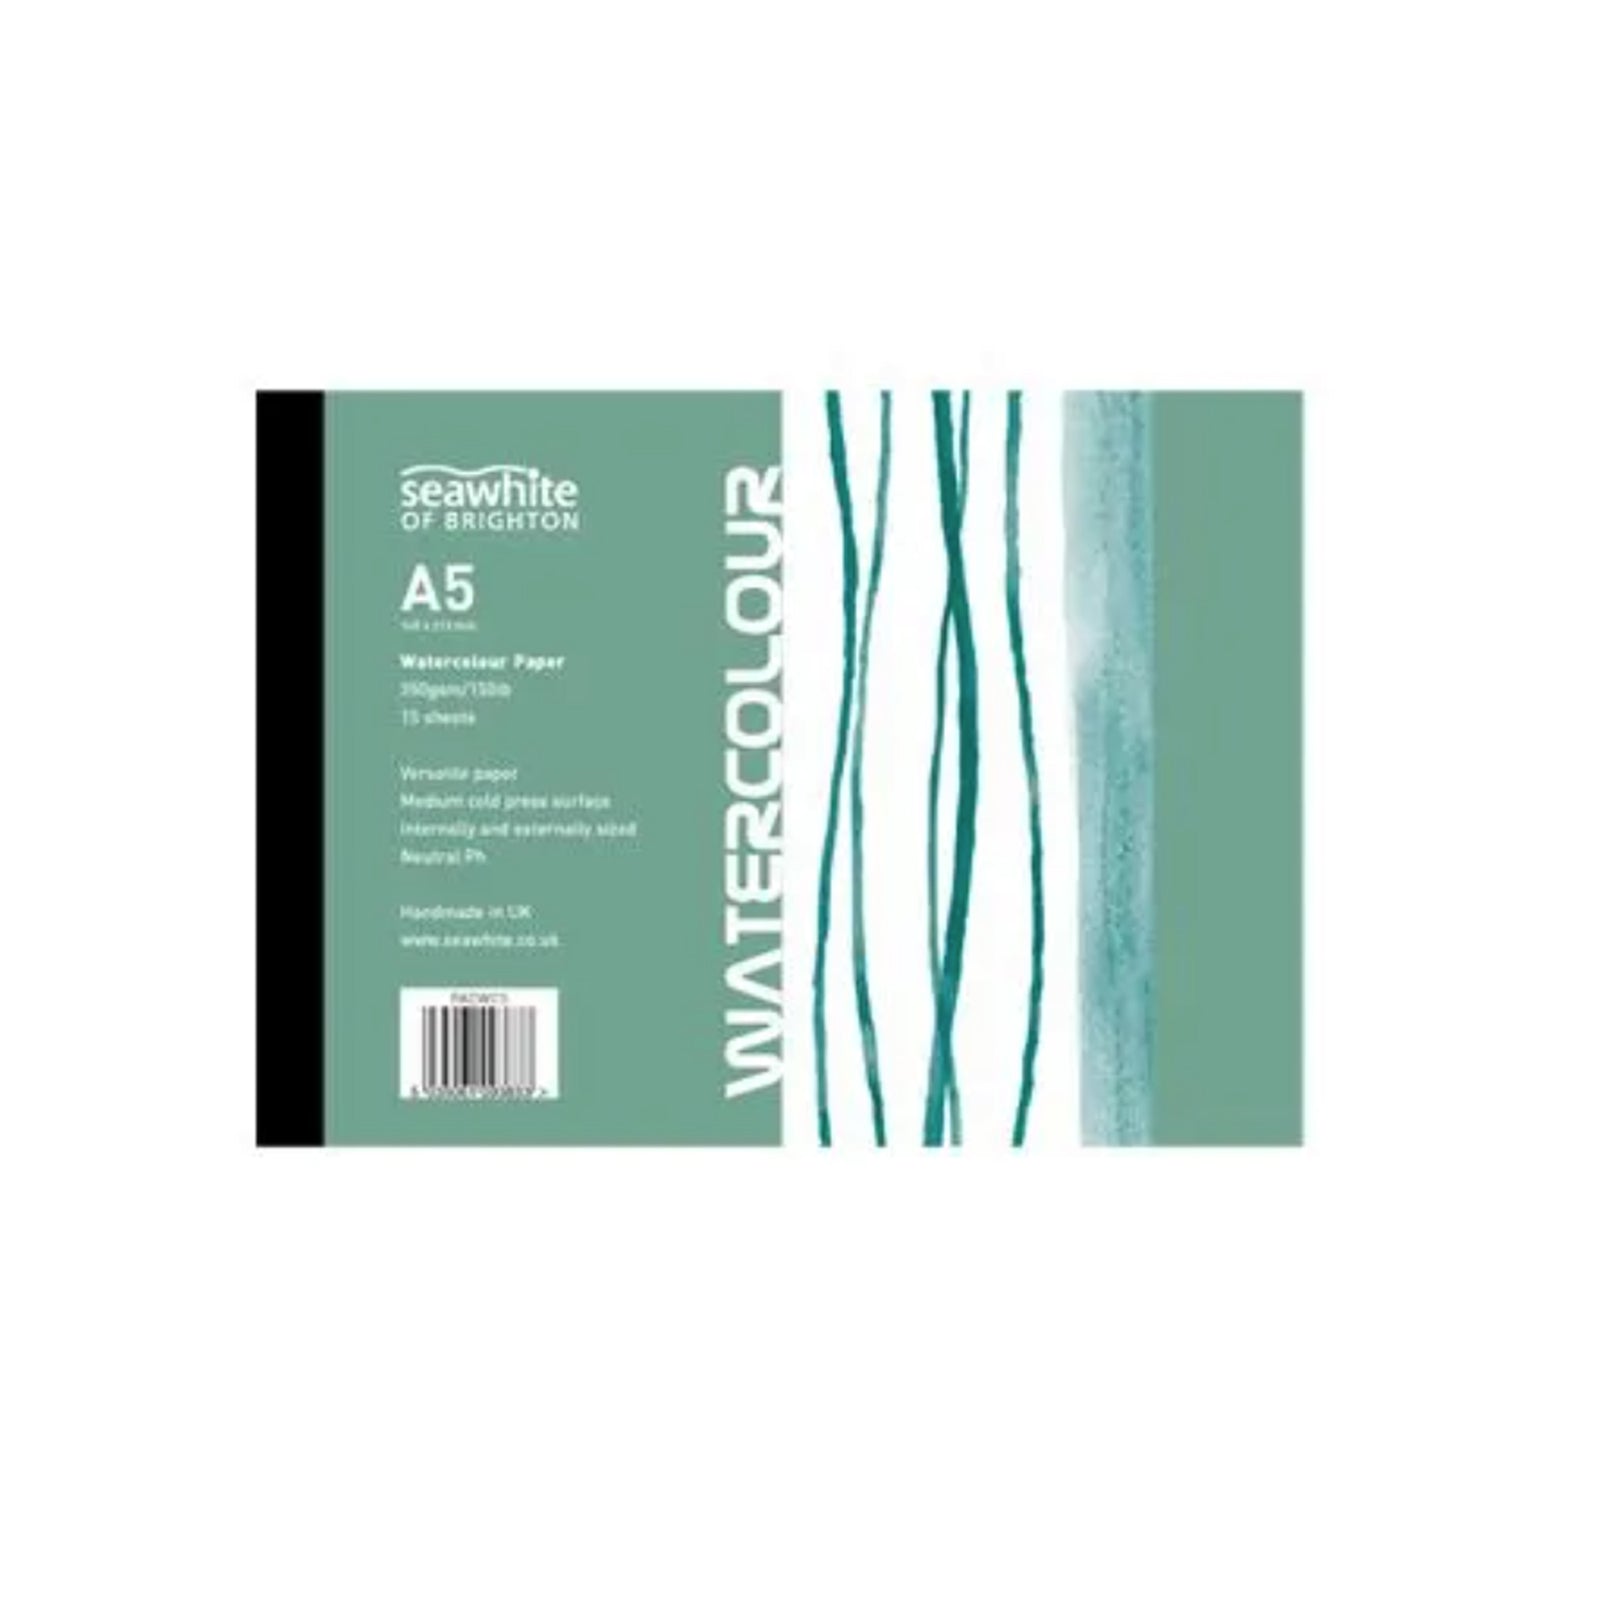 Seawhite of Brighton Acrylic Painting Paper Pad 15 Sheets 360gsm A4 